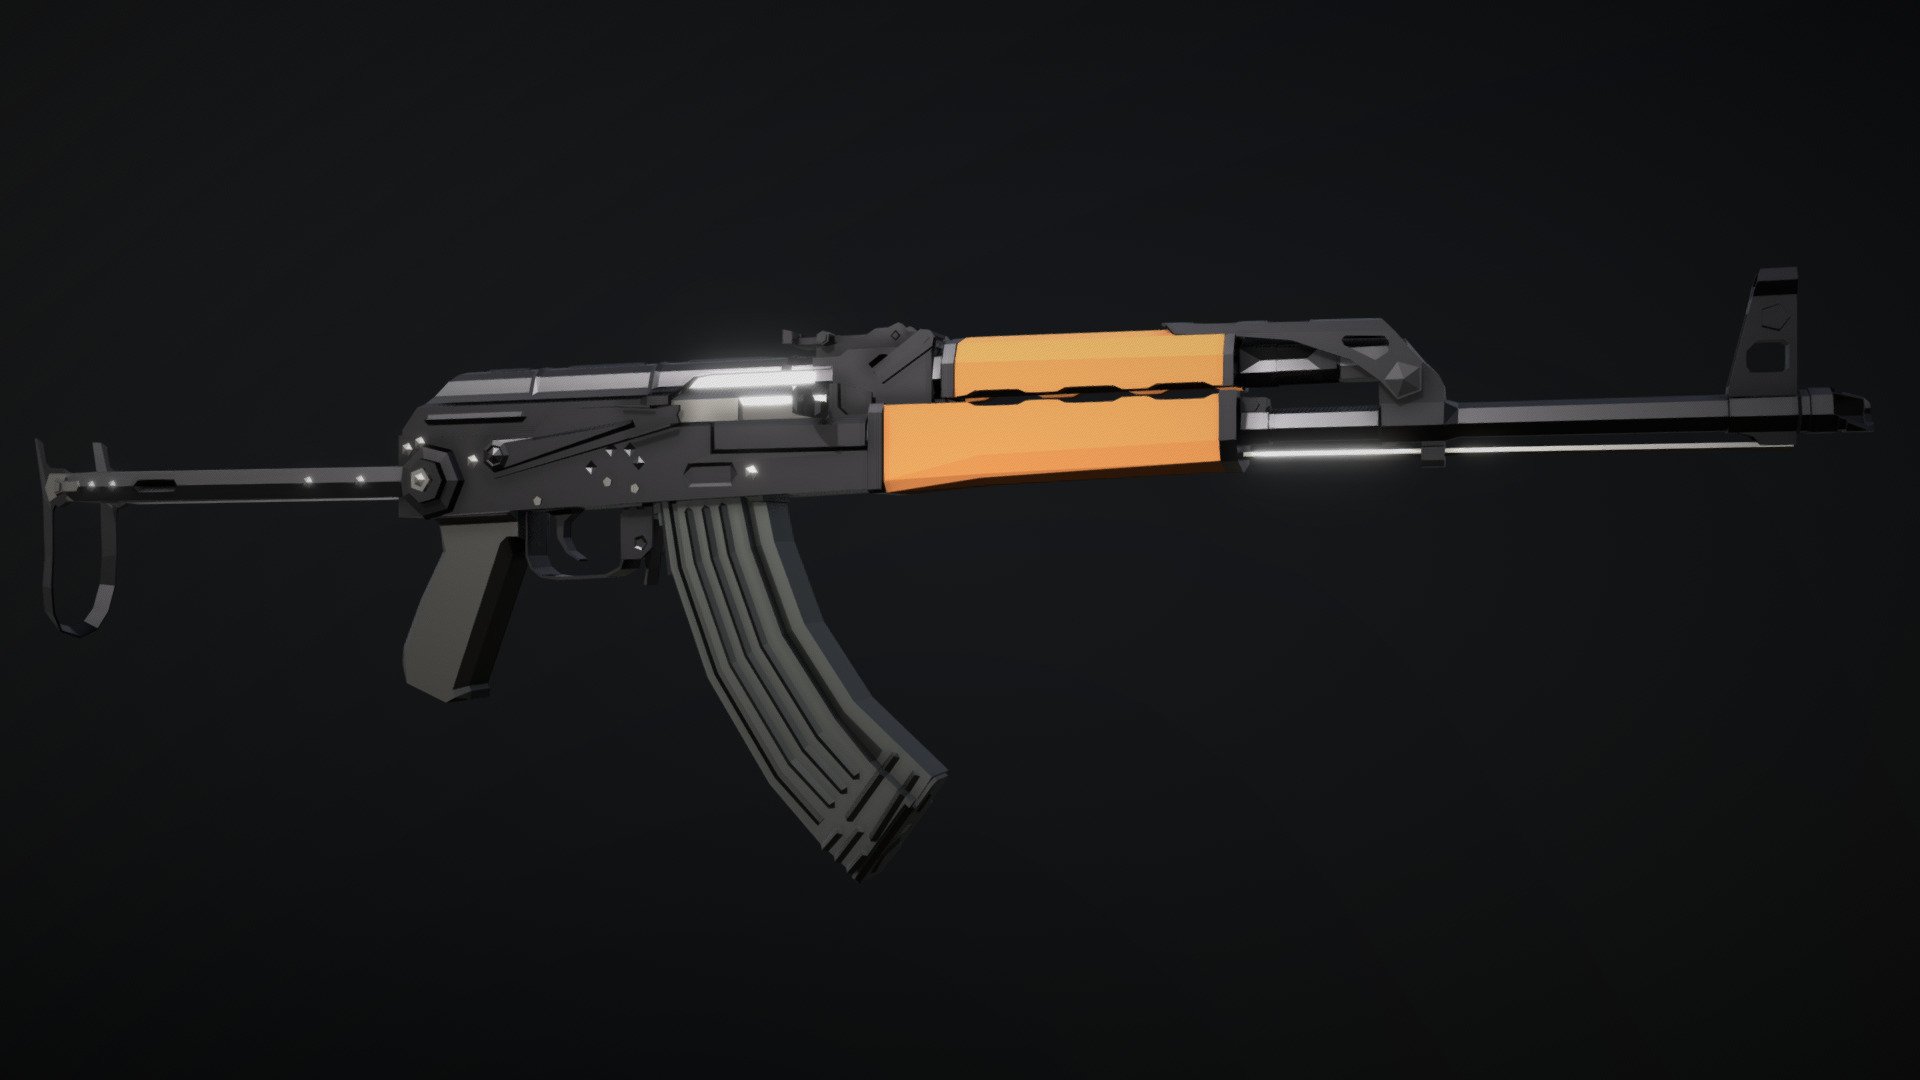 Low-Poly model of the Zastava M70AB2, an AK variant with an underfolding stock, a gas shutoff valve with a function as a rear sight for launching rifle grenades, and an empty mag bolt hold-open 3d model